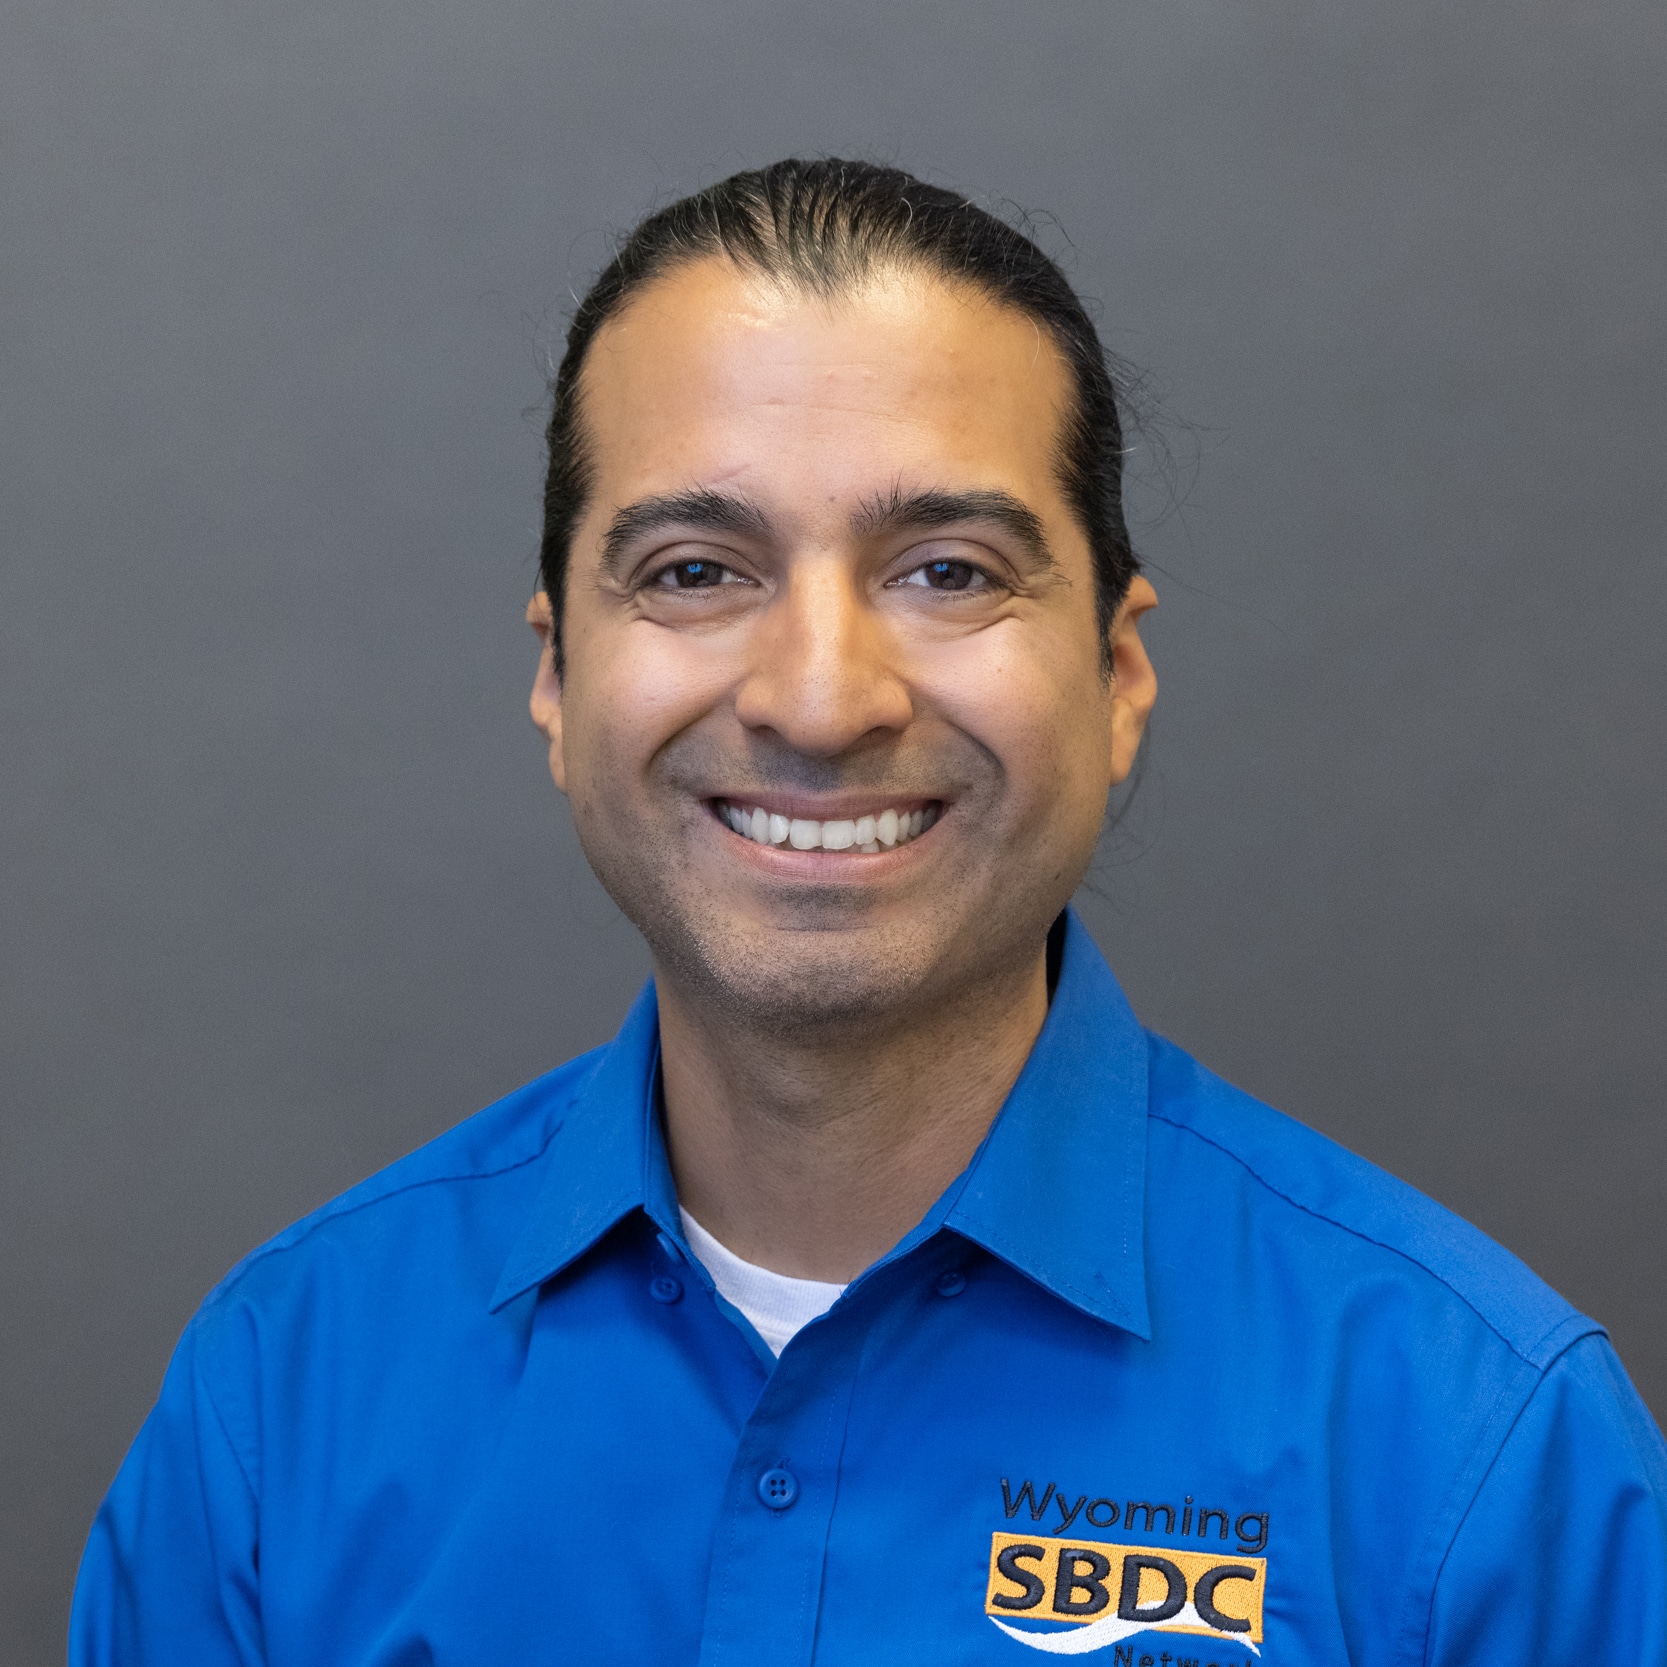 Picture of Nicholas Giraldo in a white shirt that says "Wyoming SBDC Network"